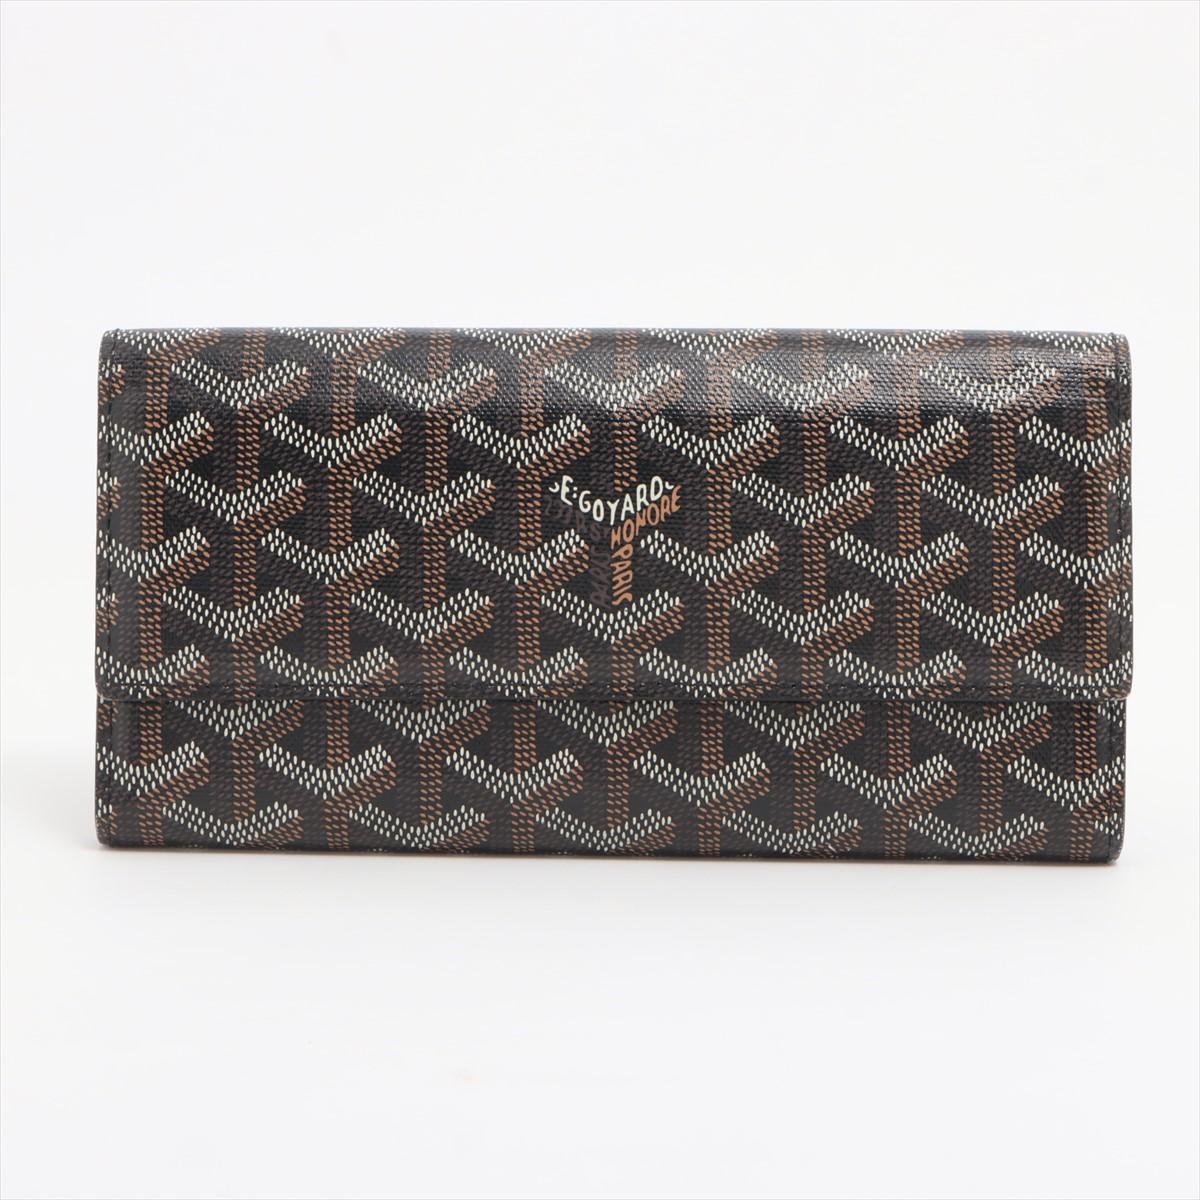 The Goyard Herringbone Long Wallet in a striking Black and Brown color combination is a testament to the brand's timeless elegance and meticulous craftsmanship. Constructed with the iconic Goyardine canvas featuring a distinctive herringbone